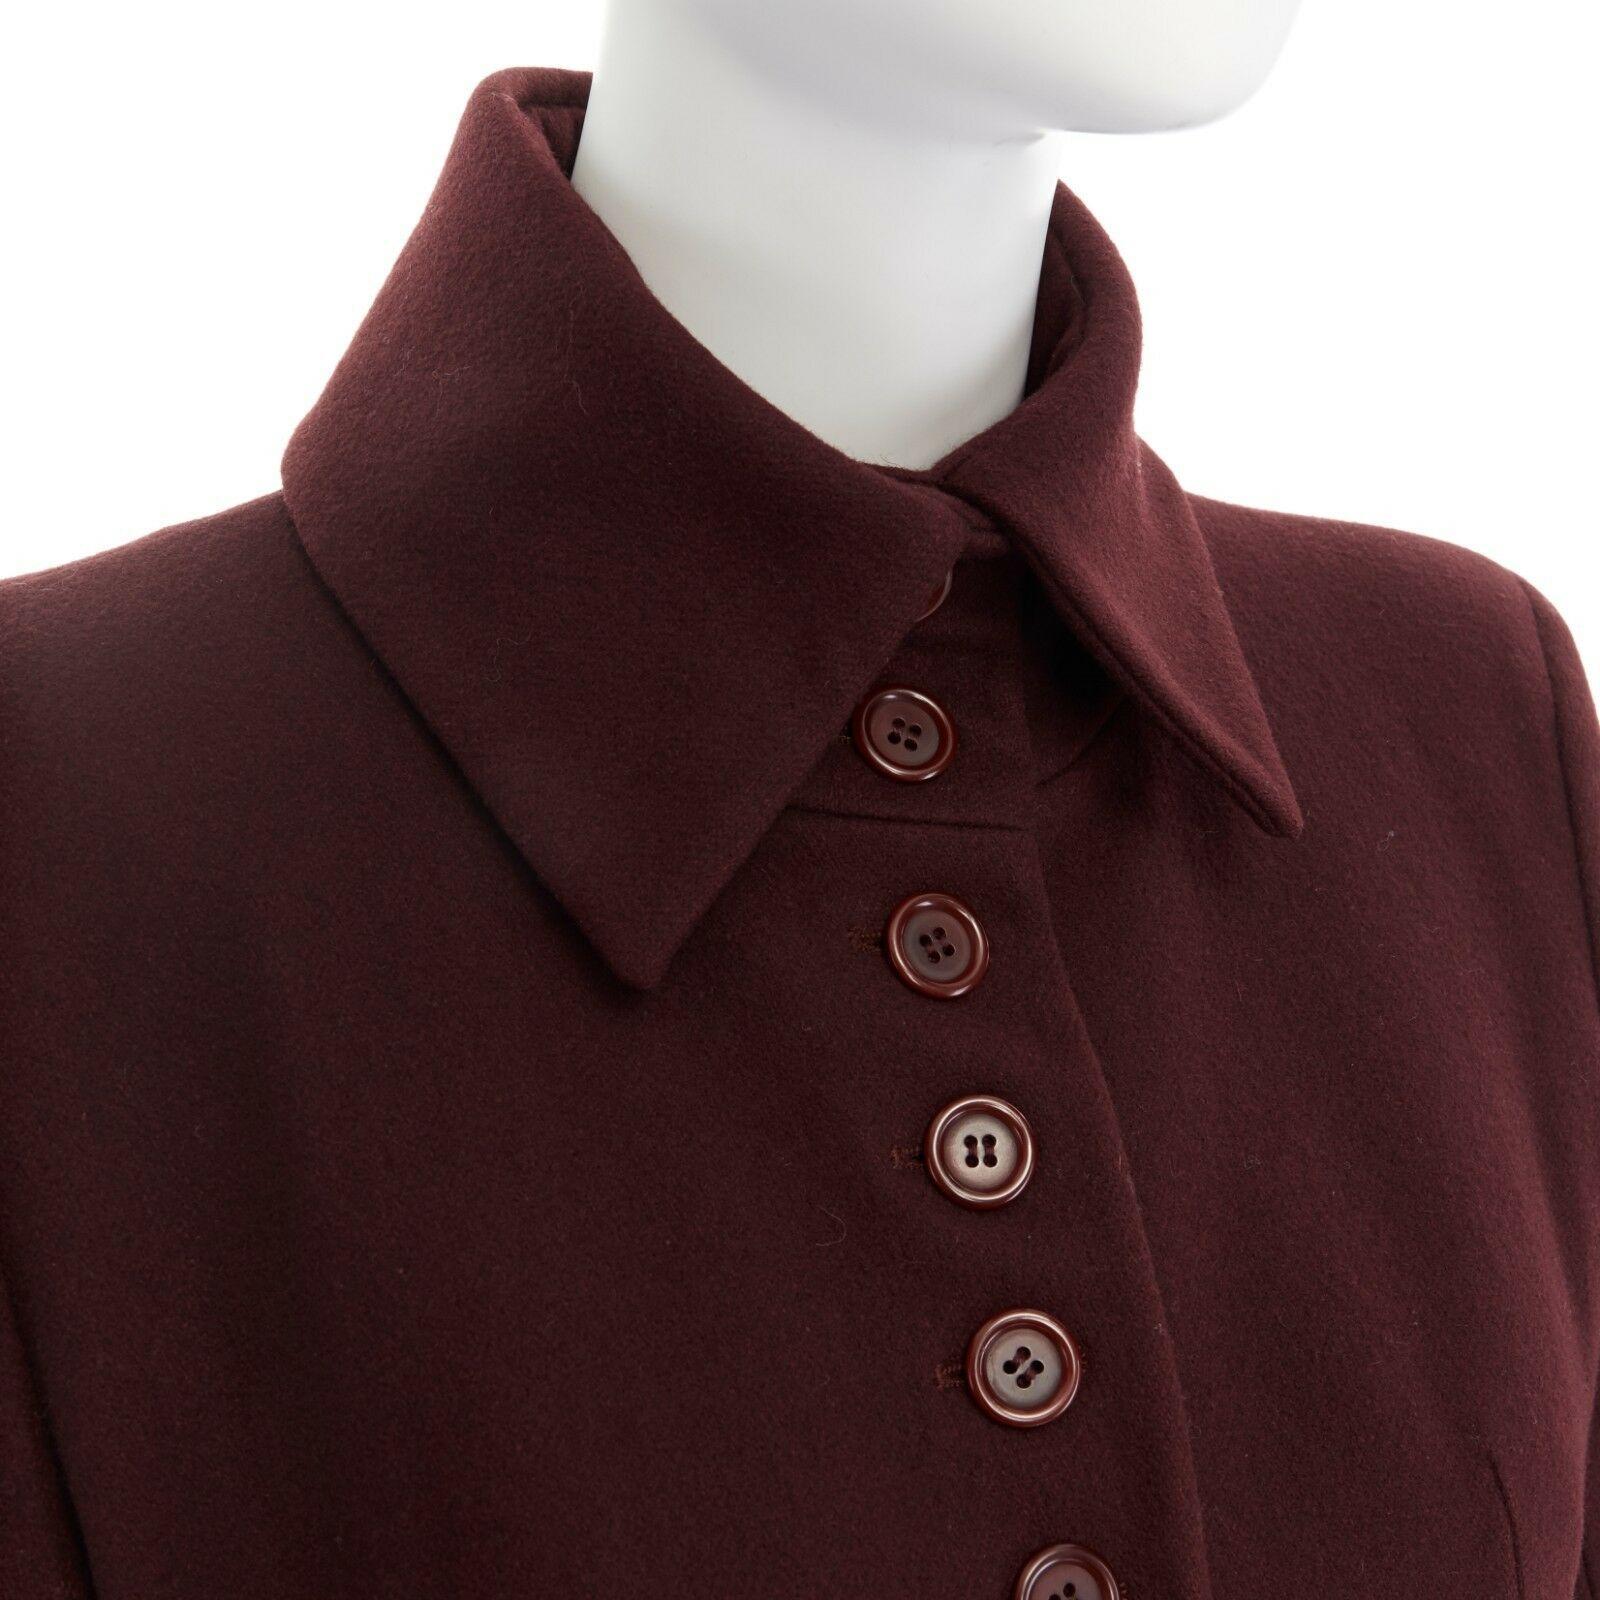 ALEXANDER MCQUEEN Vintage AW98 Joan red wool victorian button down coat IT40 S

ALEXANDER MCQUEEN VINTAGE
FROM THE FALL WINTER 1998 'JOAN' COLLECTIONBURGUNGY BLOOD RED . OVERSIZED COLLAR . BUTTON FRONT CLOSURE . SLANTED POCKETS AT FRONT . CUFFED